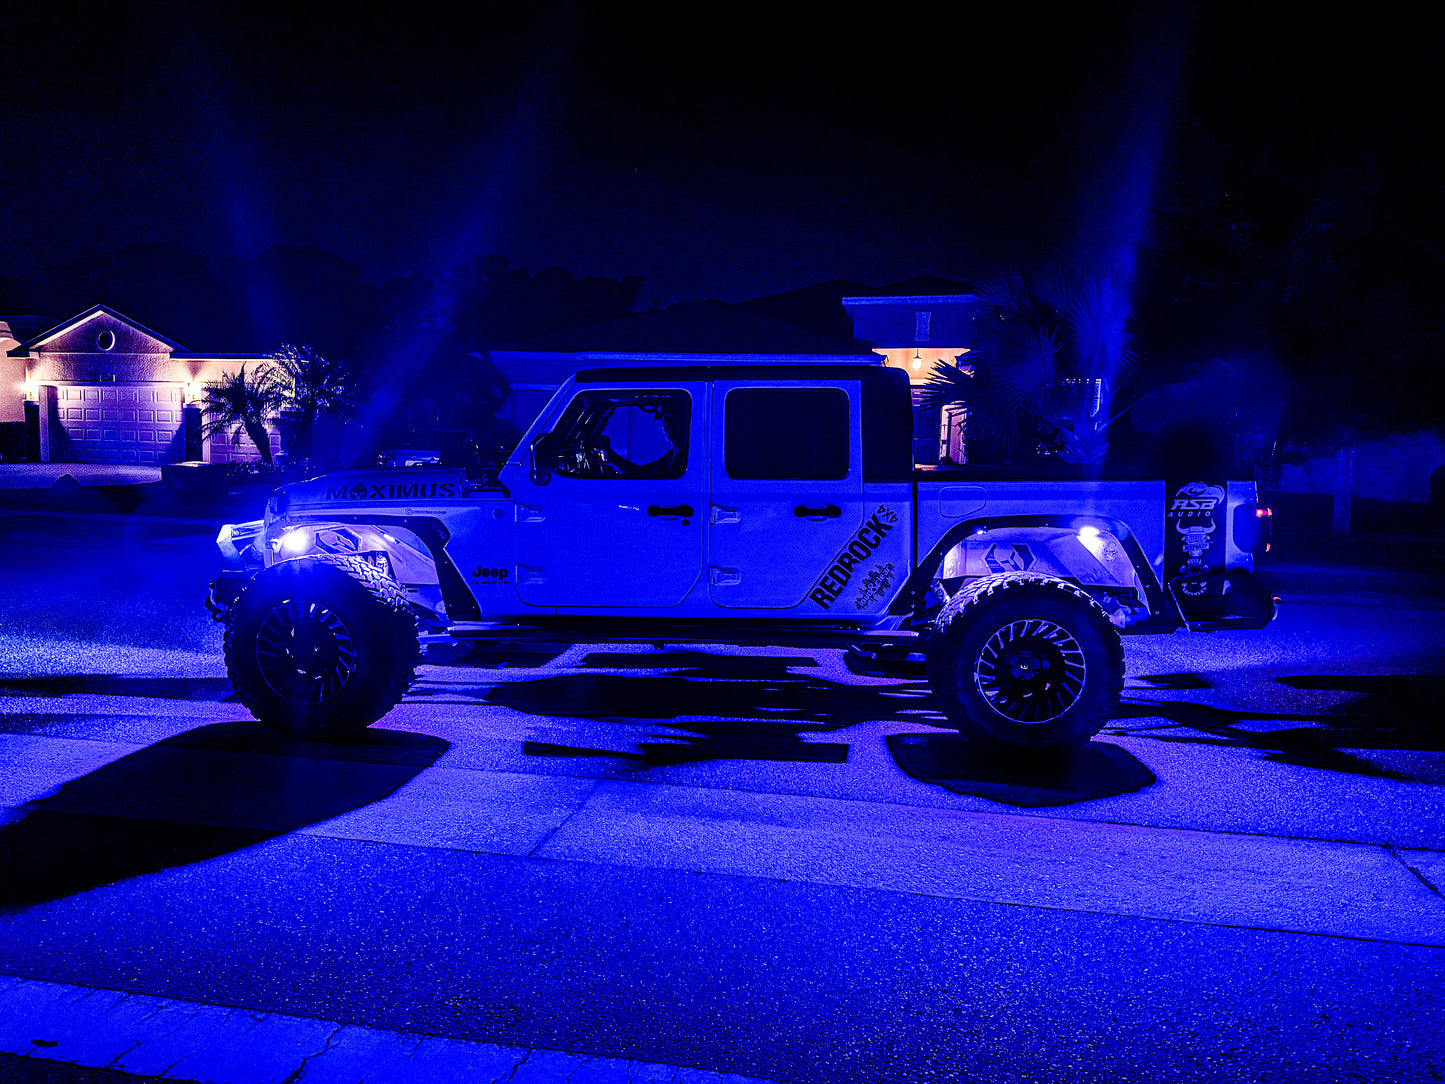 two jeeps parked in front of a house at night